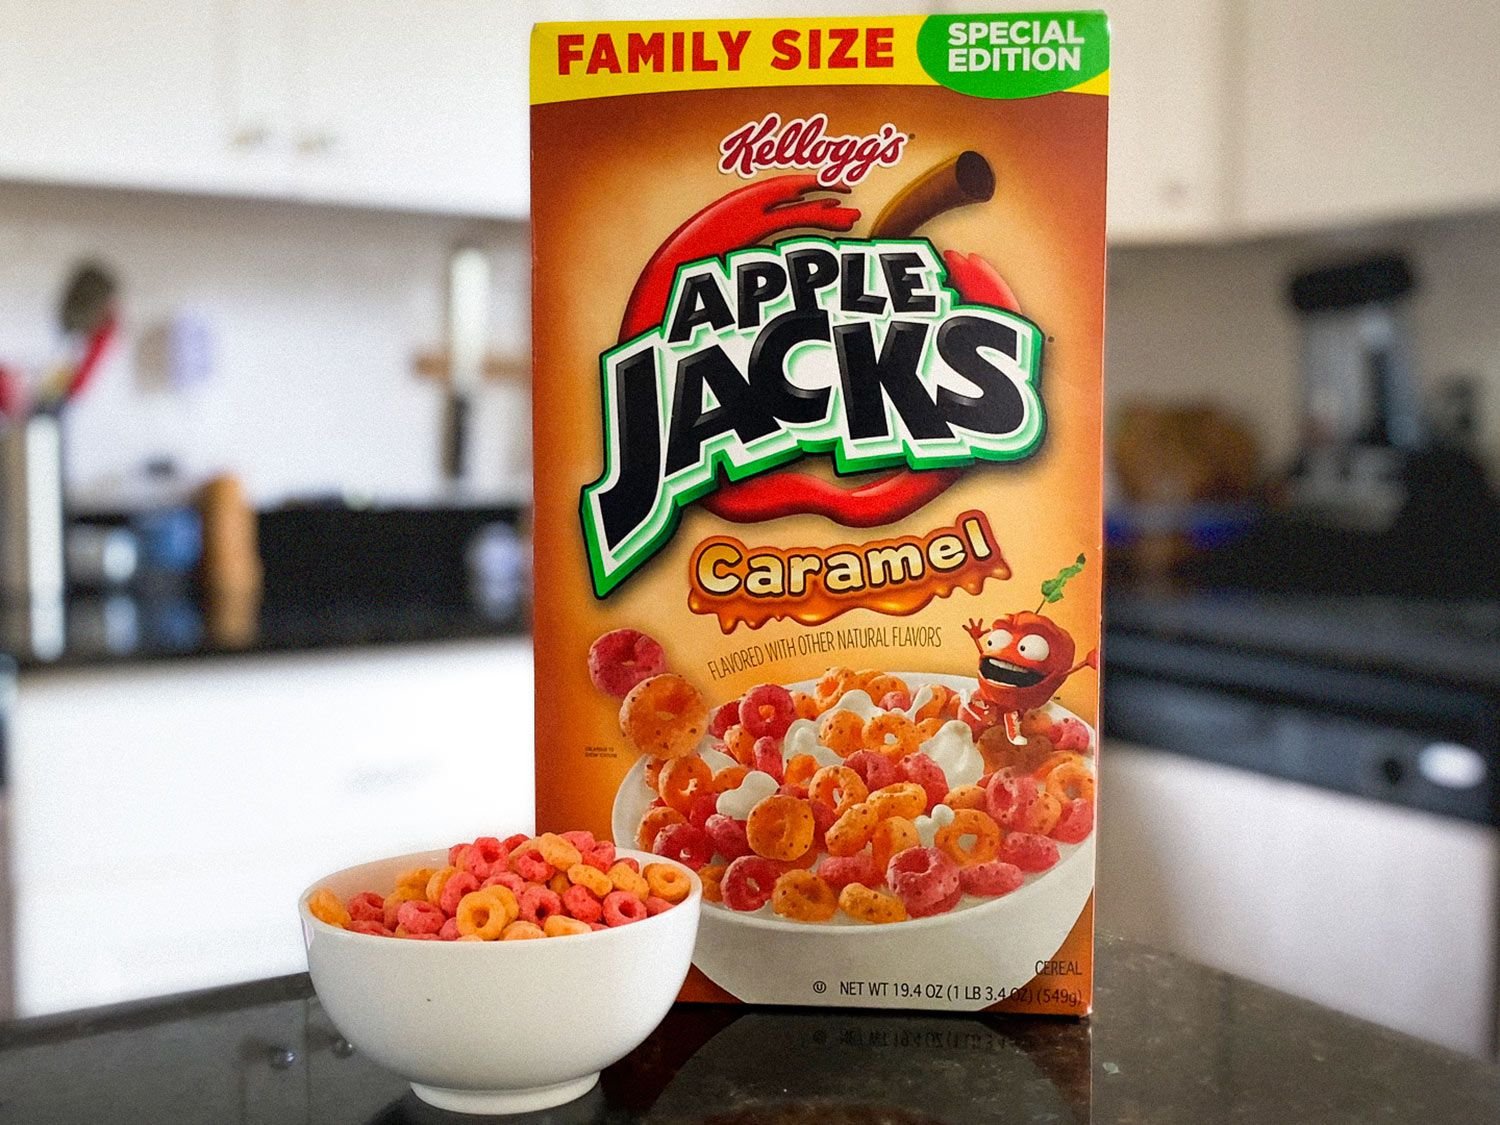 The 2020 of Cereal: Kellogg’s Apple Jacks Caramel Cereal, Reviewed